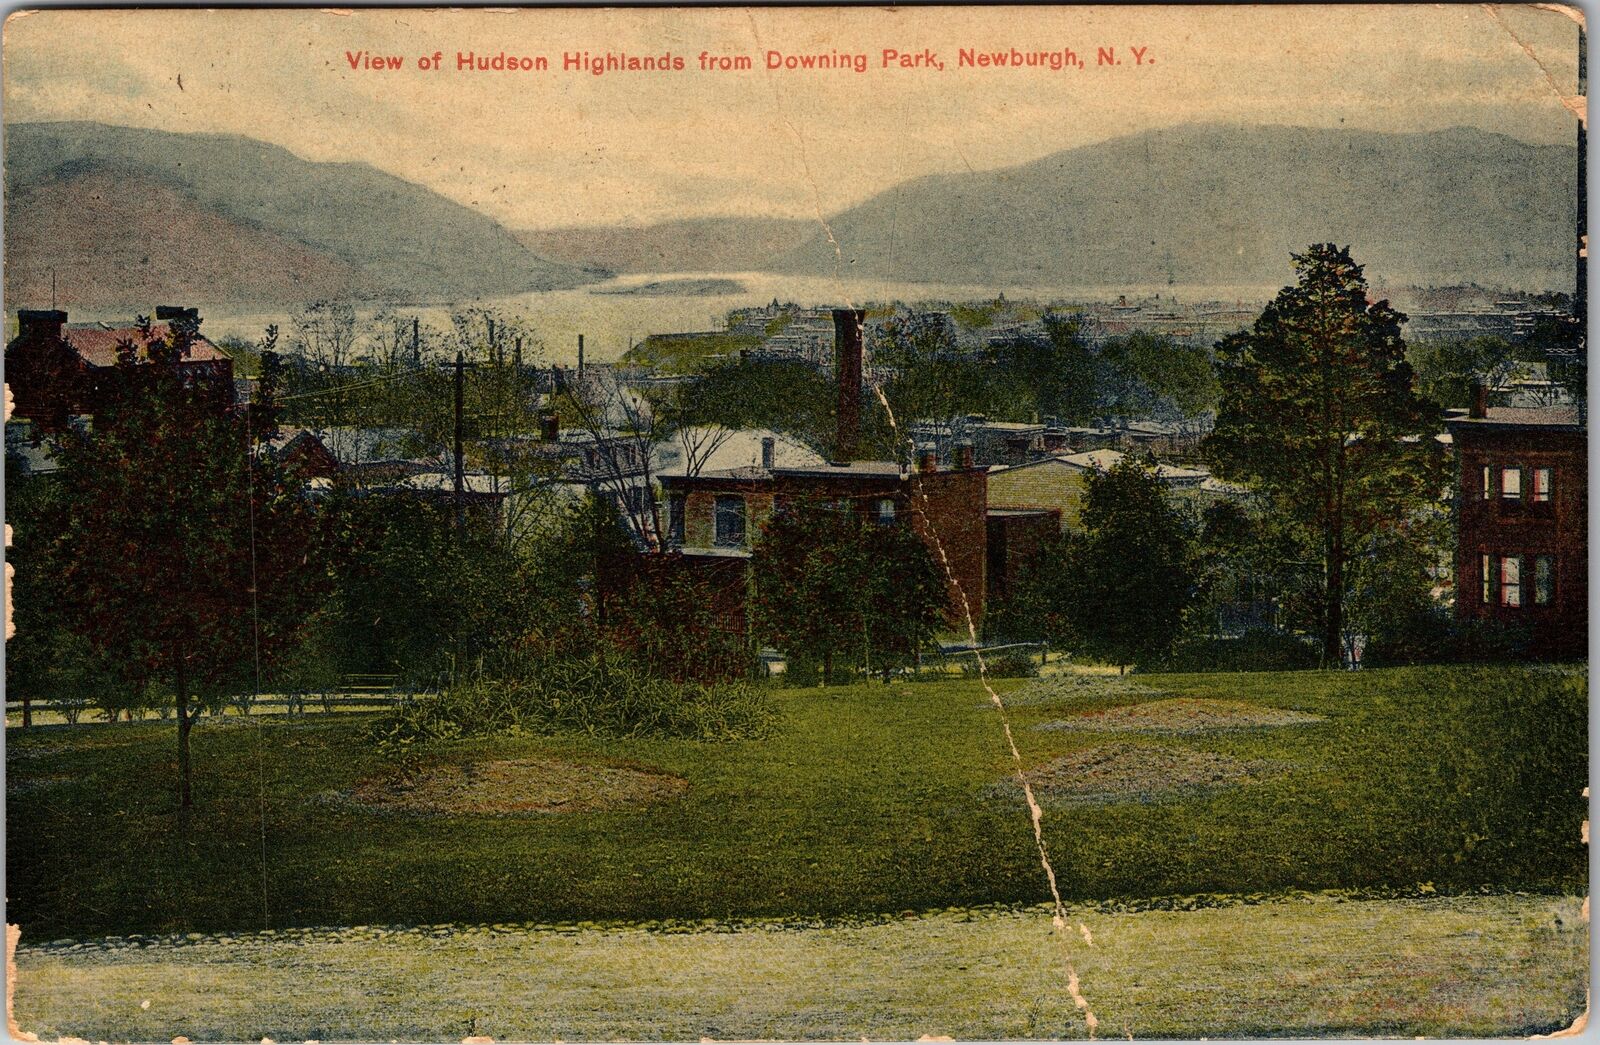 Newburgh NY-New York View Hudson Highlands from Downing Park Vintage Postcard